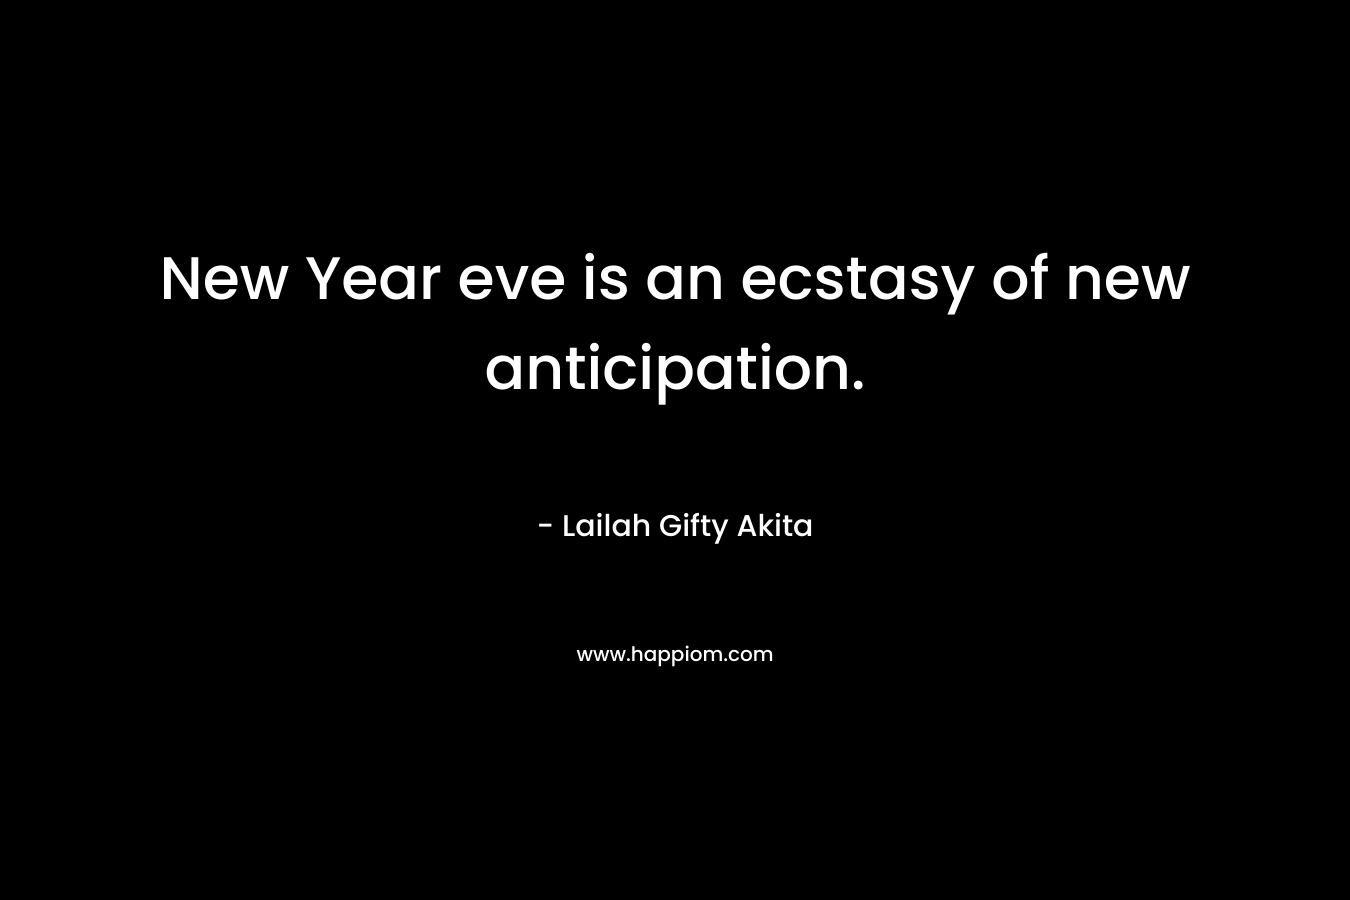 New Year eve is an ecstasy of new anticipation. – Lailah Gifty Akita